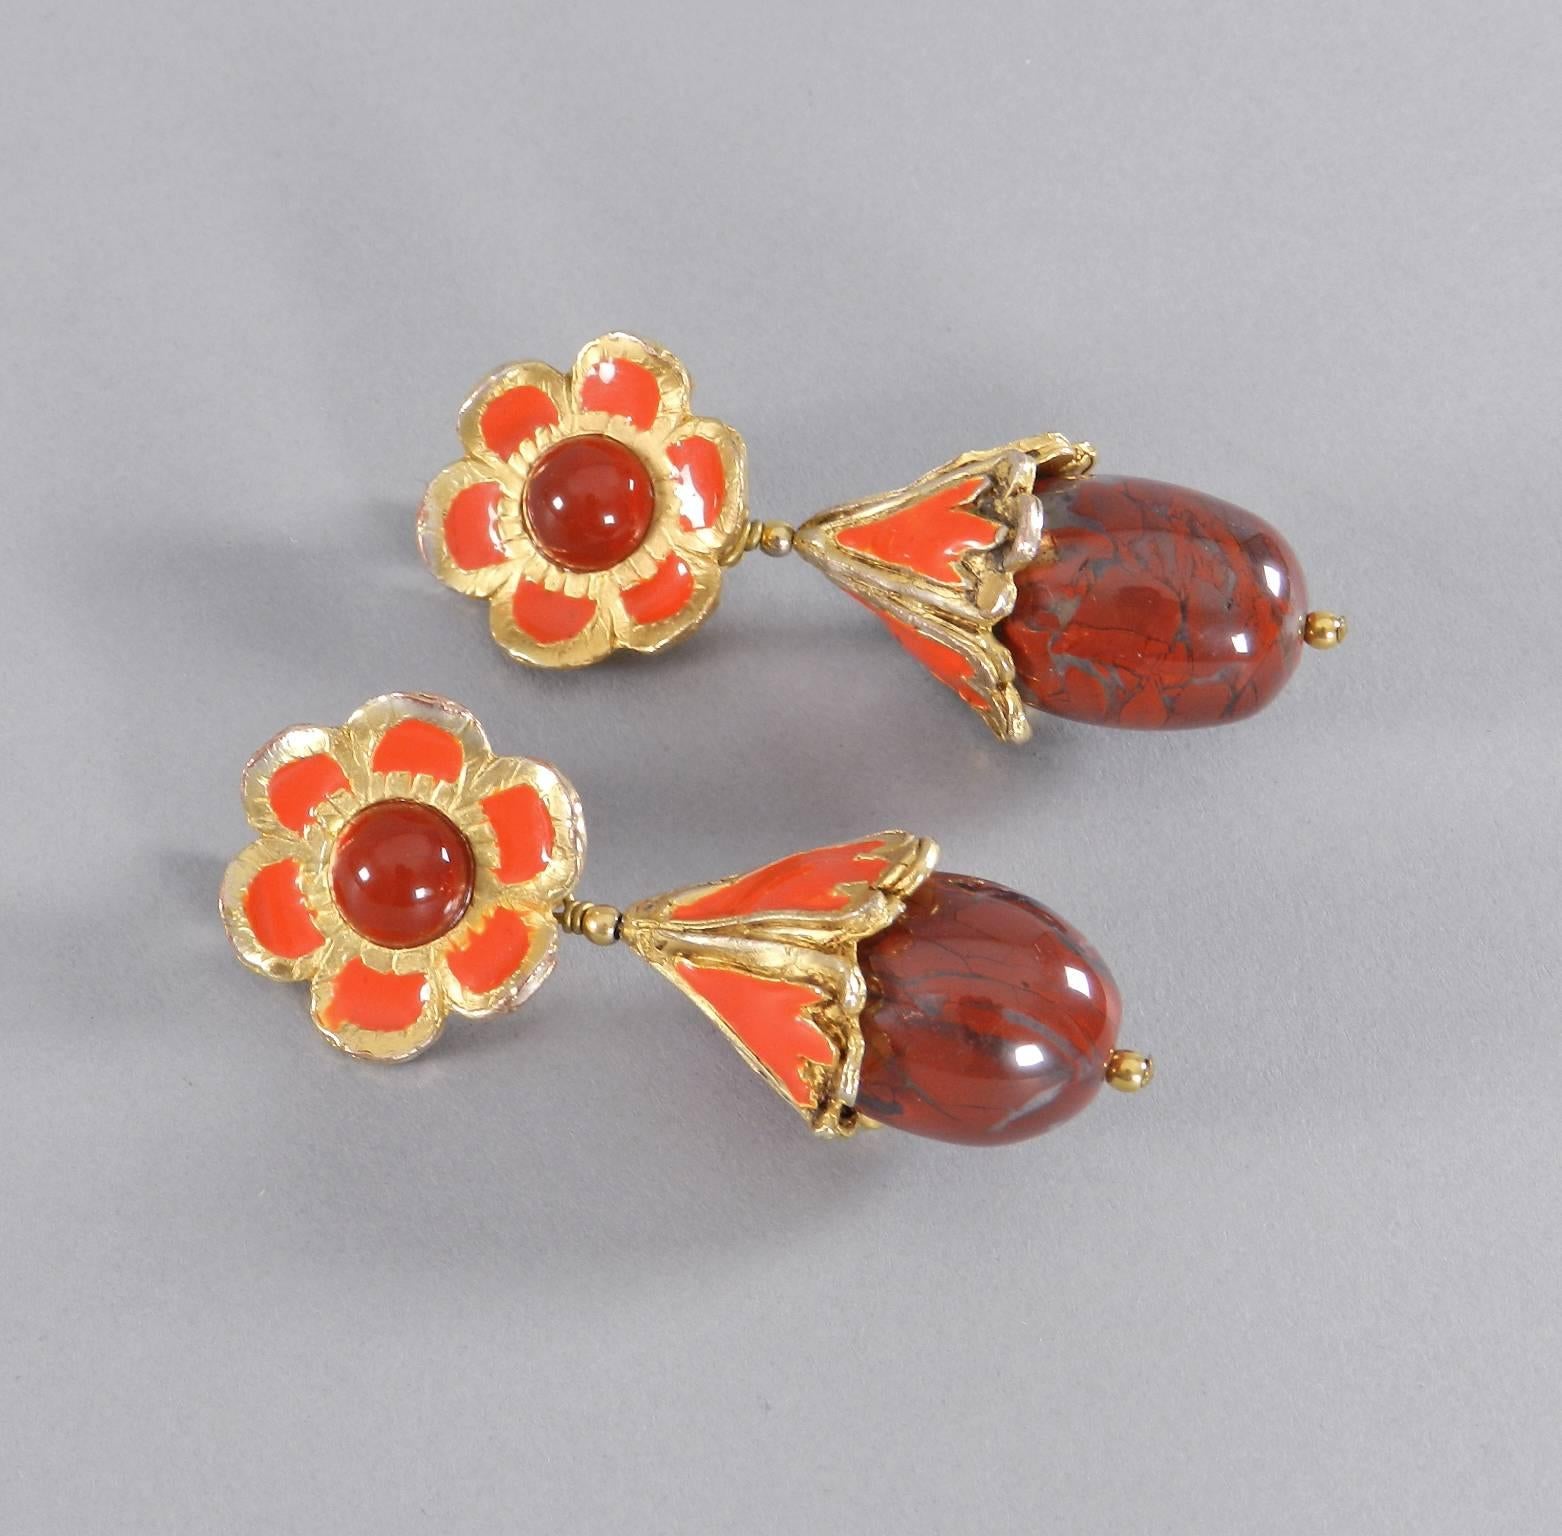 Vintage 1980's Yves Saint Laurent YSL rive gauche drop earrings. Polished agate drops with carnelian colored glass inserts and orange enamel. Clip back design.  Measures about 2.75